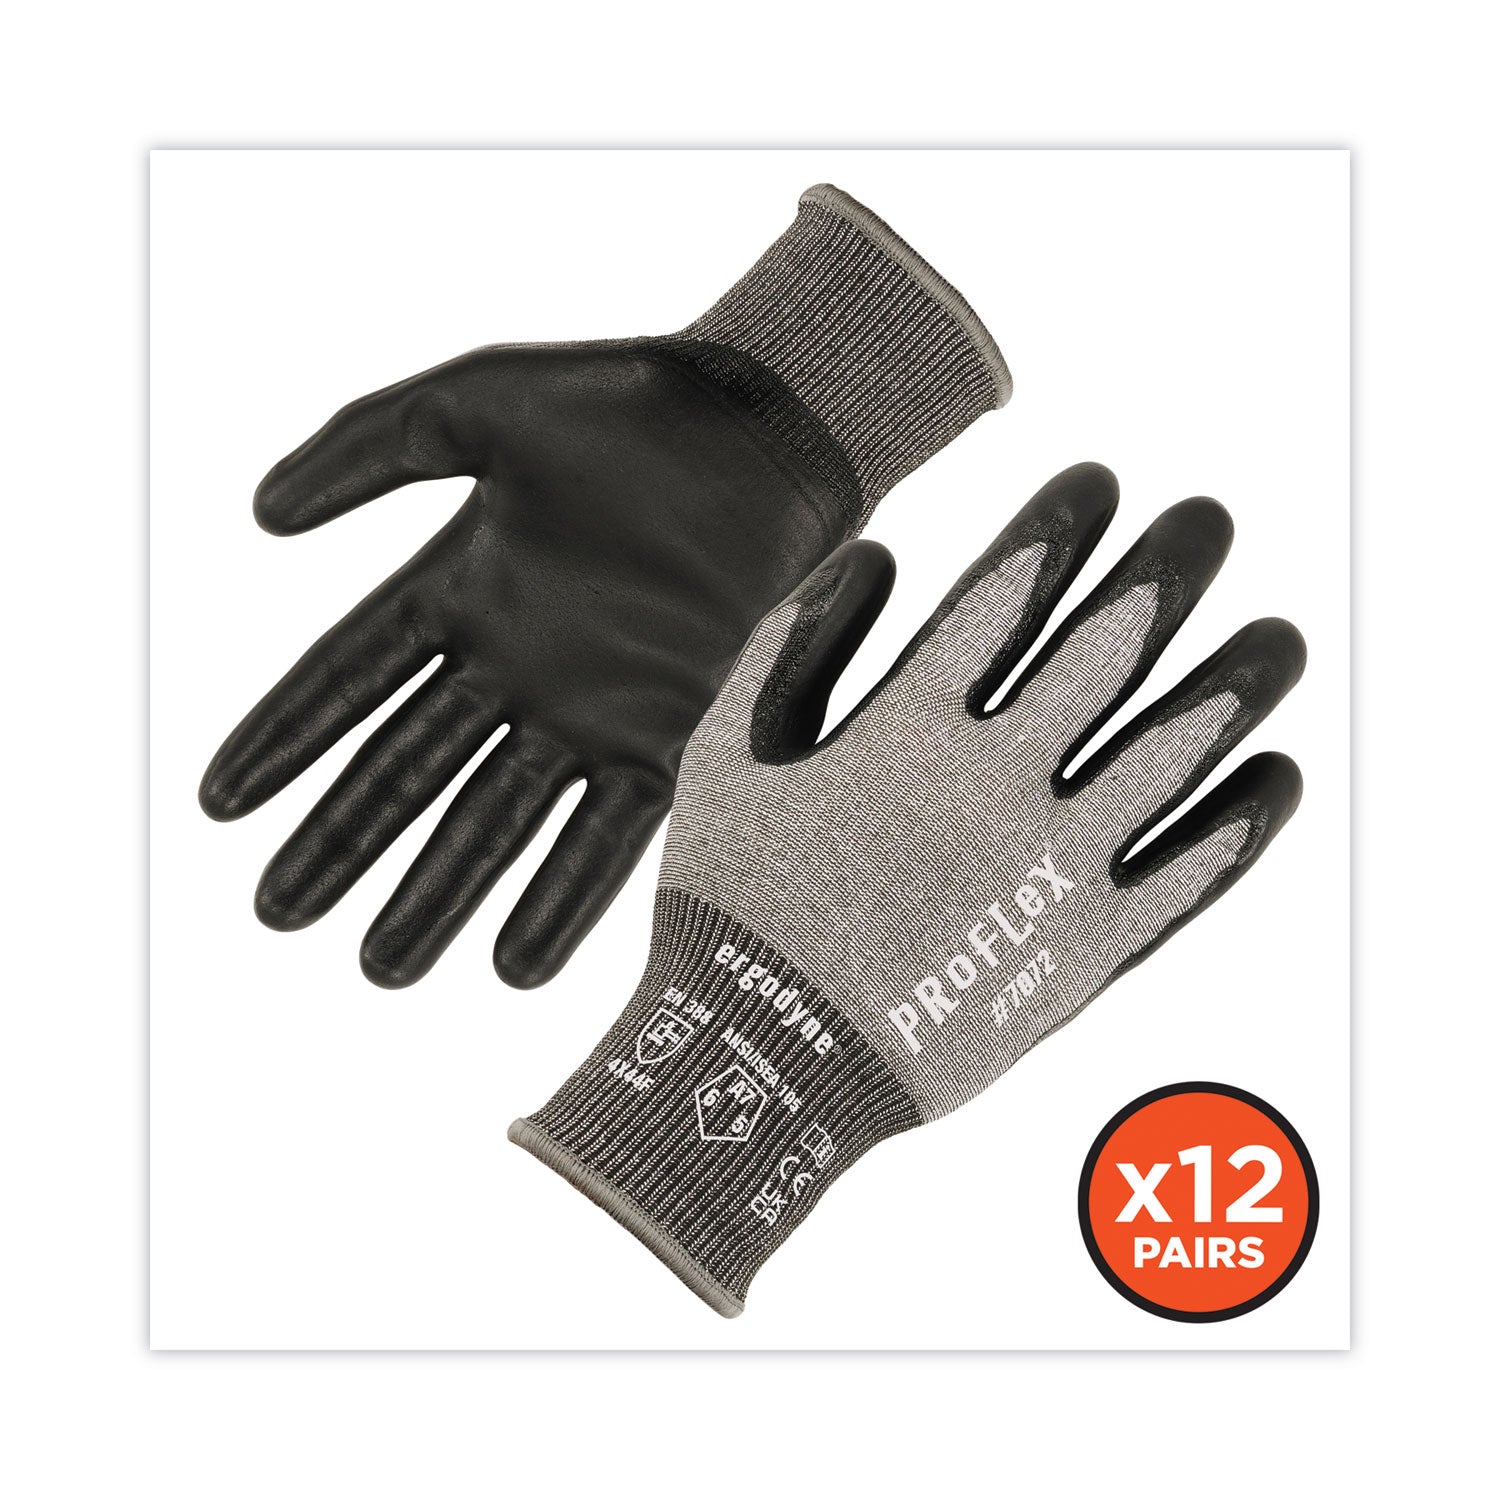 proflex-7072-ansi-a7-nitrile-coated-cr-gloves-gray-x-large-12-pairs-pack-ships-in-1-3-business-days_ego10305 - 2